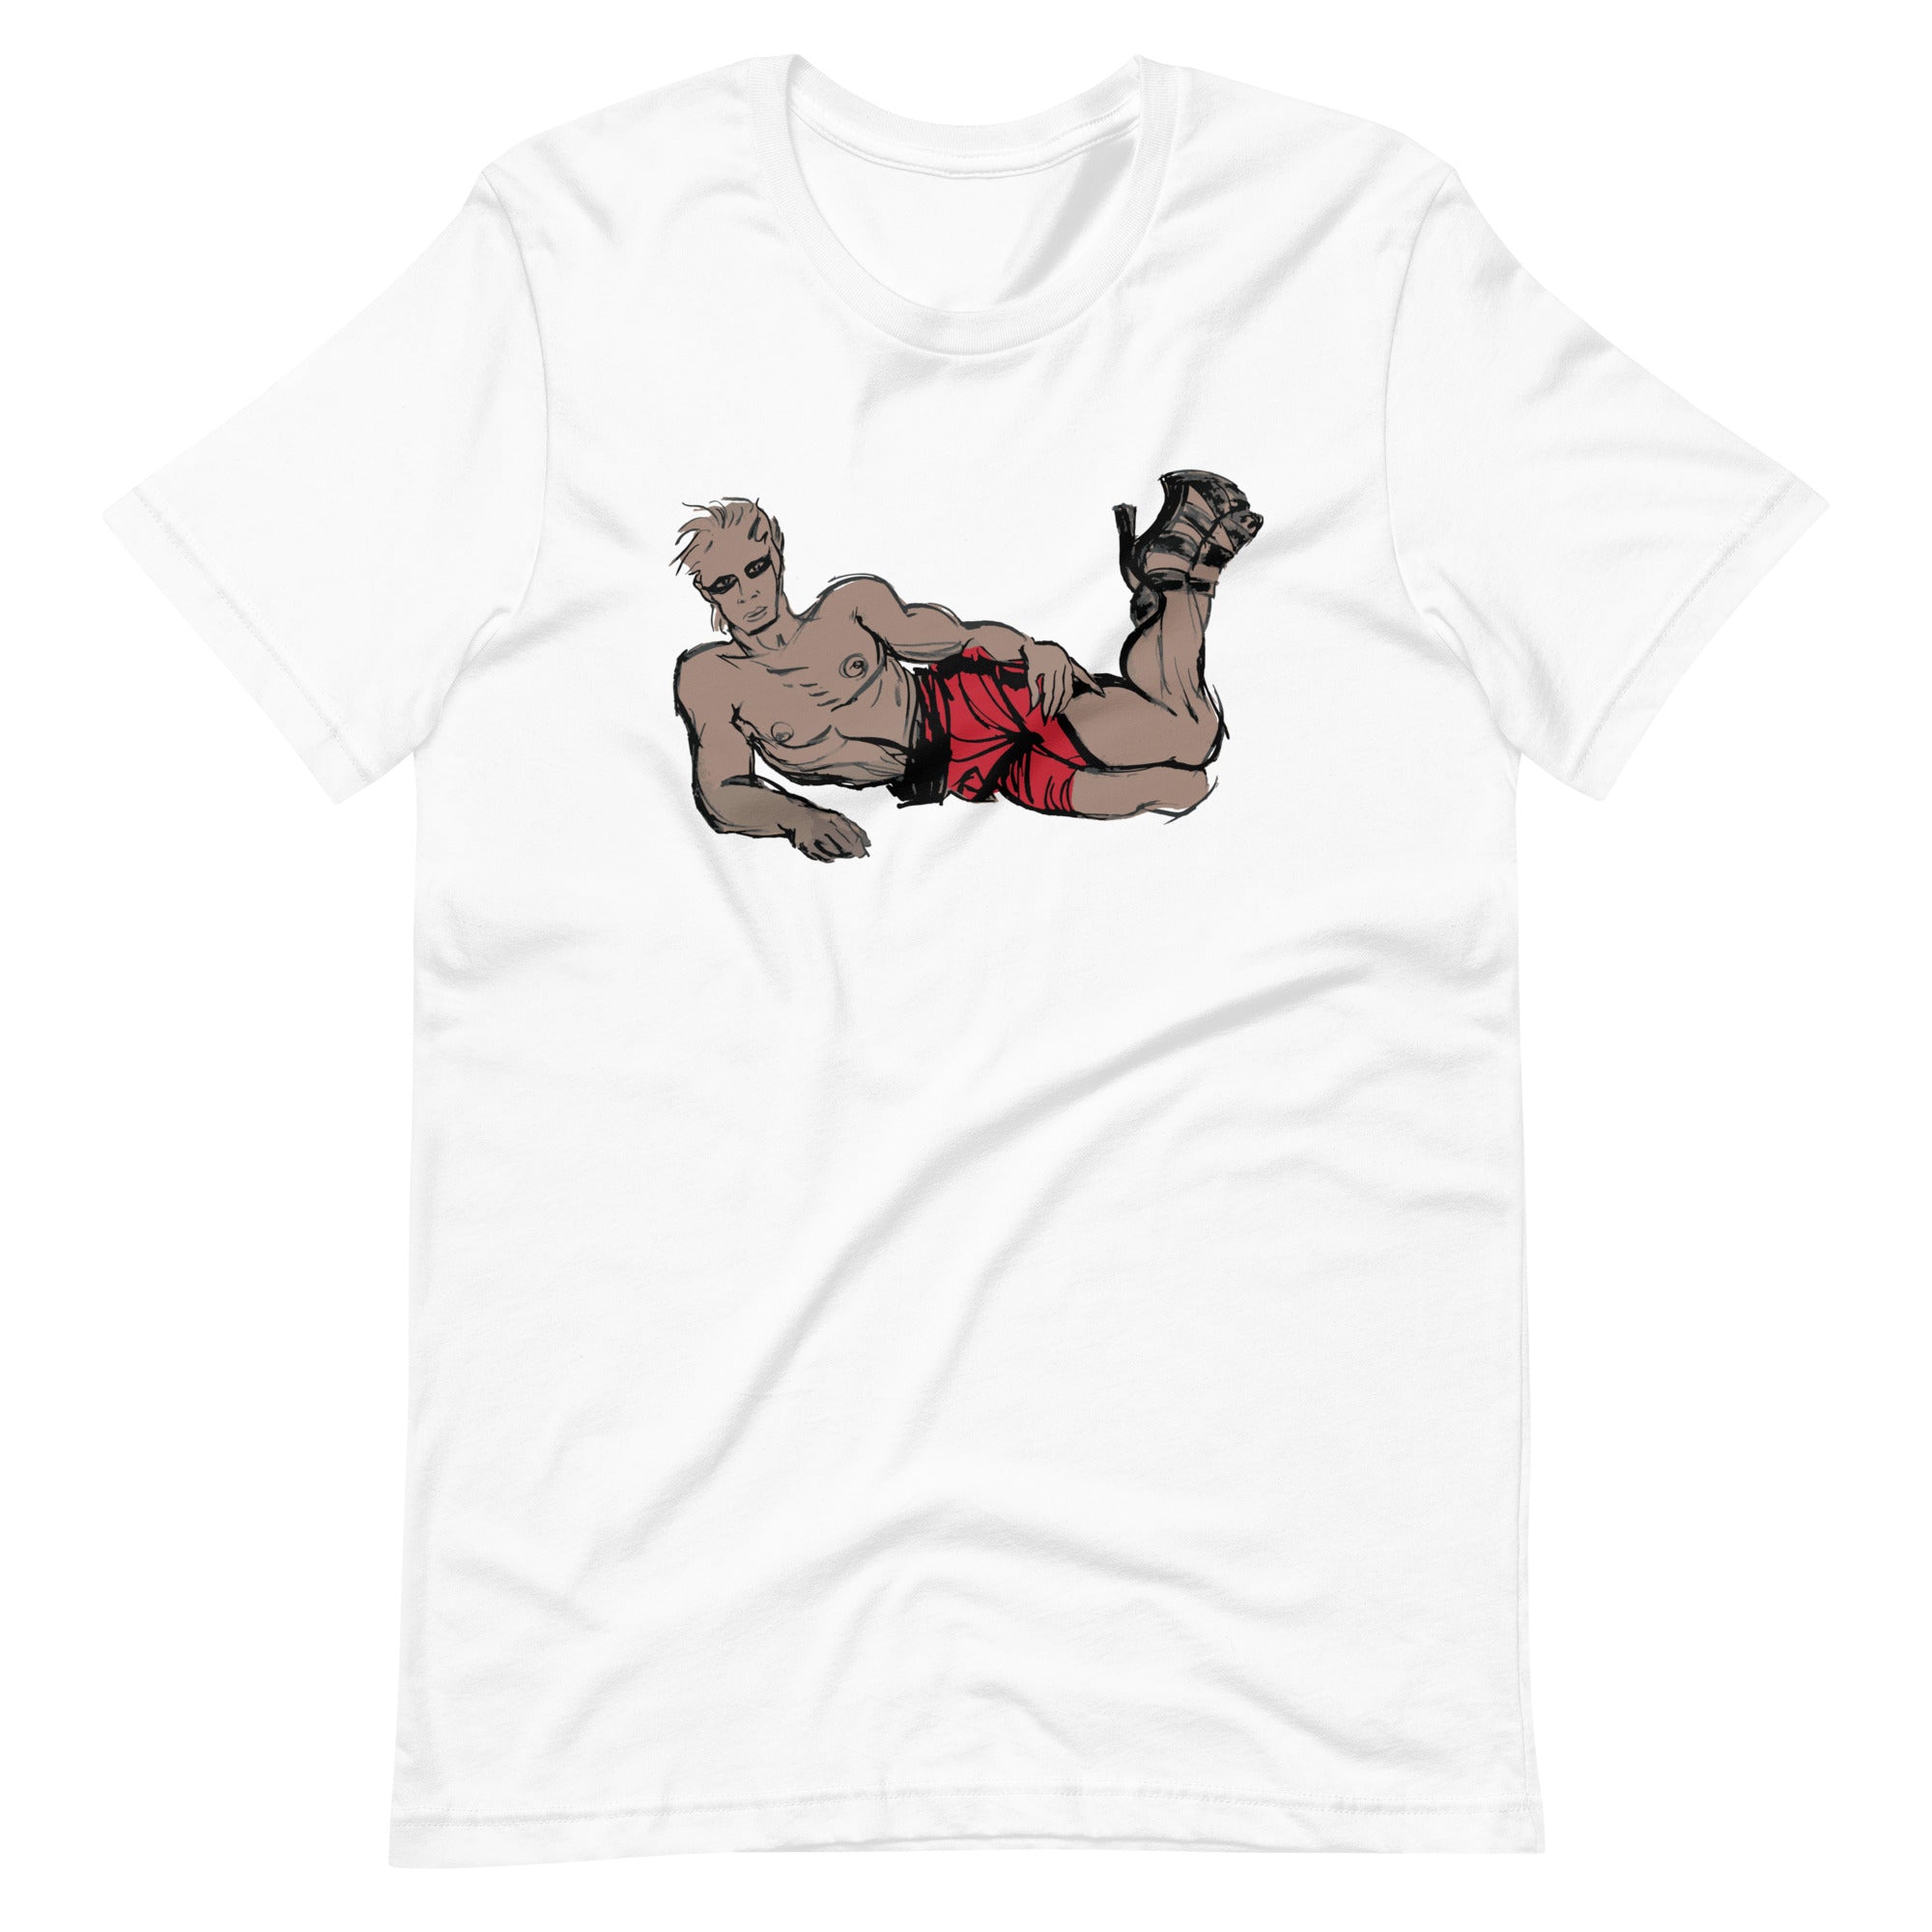 Boxing in heels, Multisex t-shirt